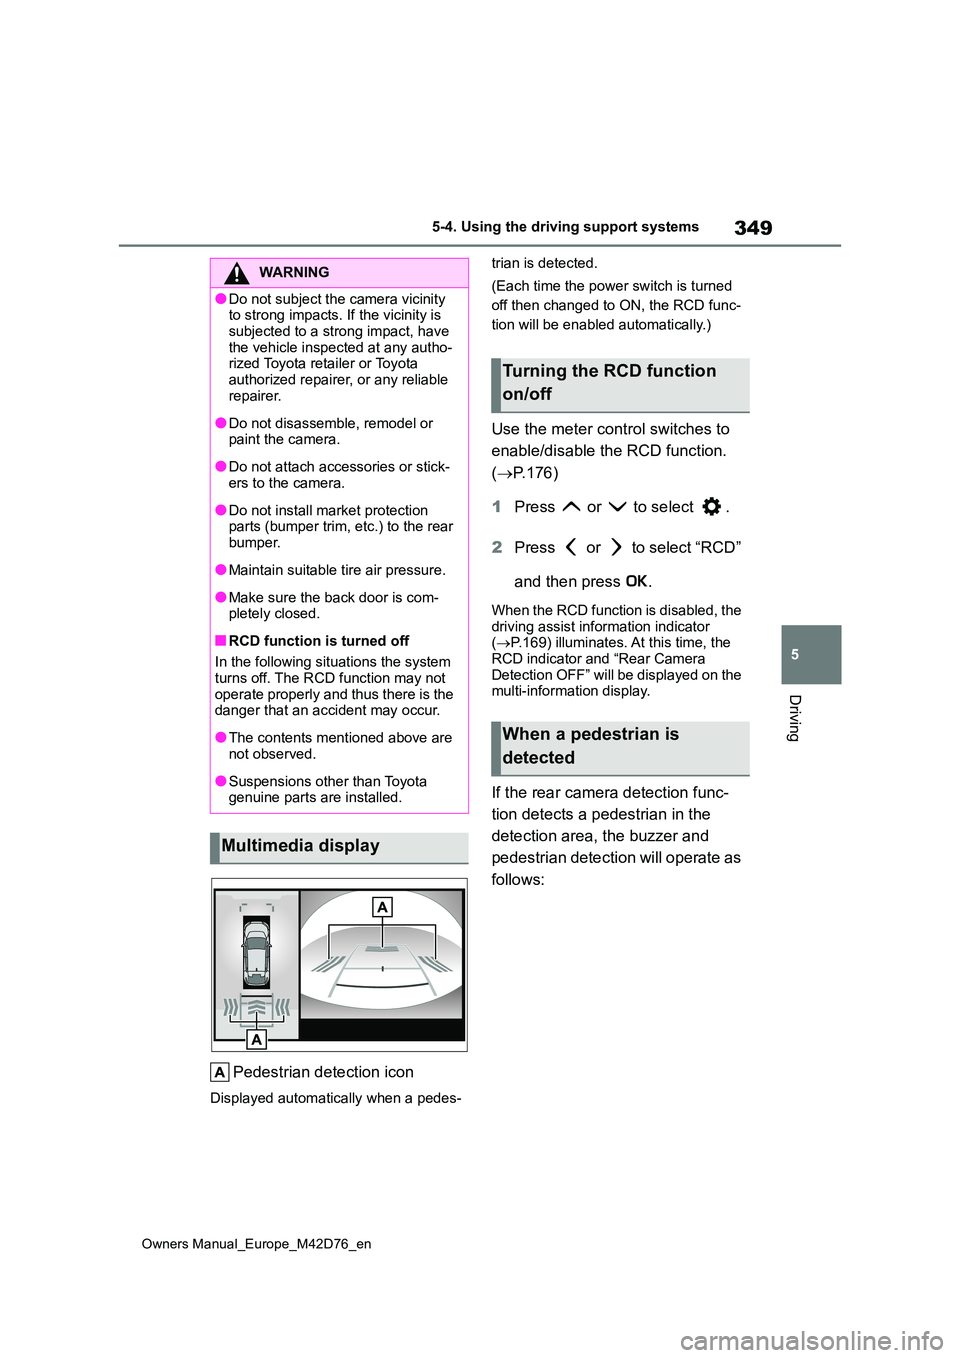 TOYOTA BZ4X 2022  Owners Manual (in English) 349
5
Owners Manual_Europe_M42D76_en
5-4. Using the driving support systems
Driving
Pedestrian detection icon
Displayed automatically when a pedes- 
trian is detected. 
(Each time the power switch is 